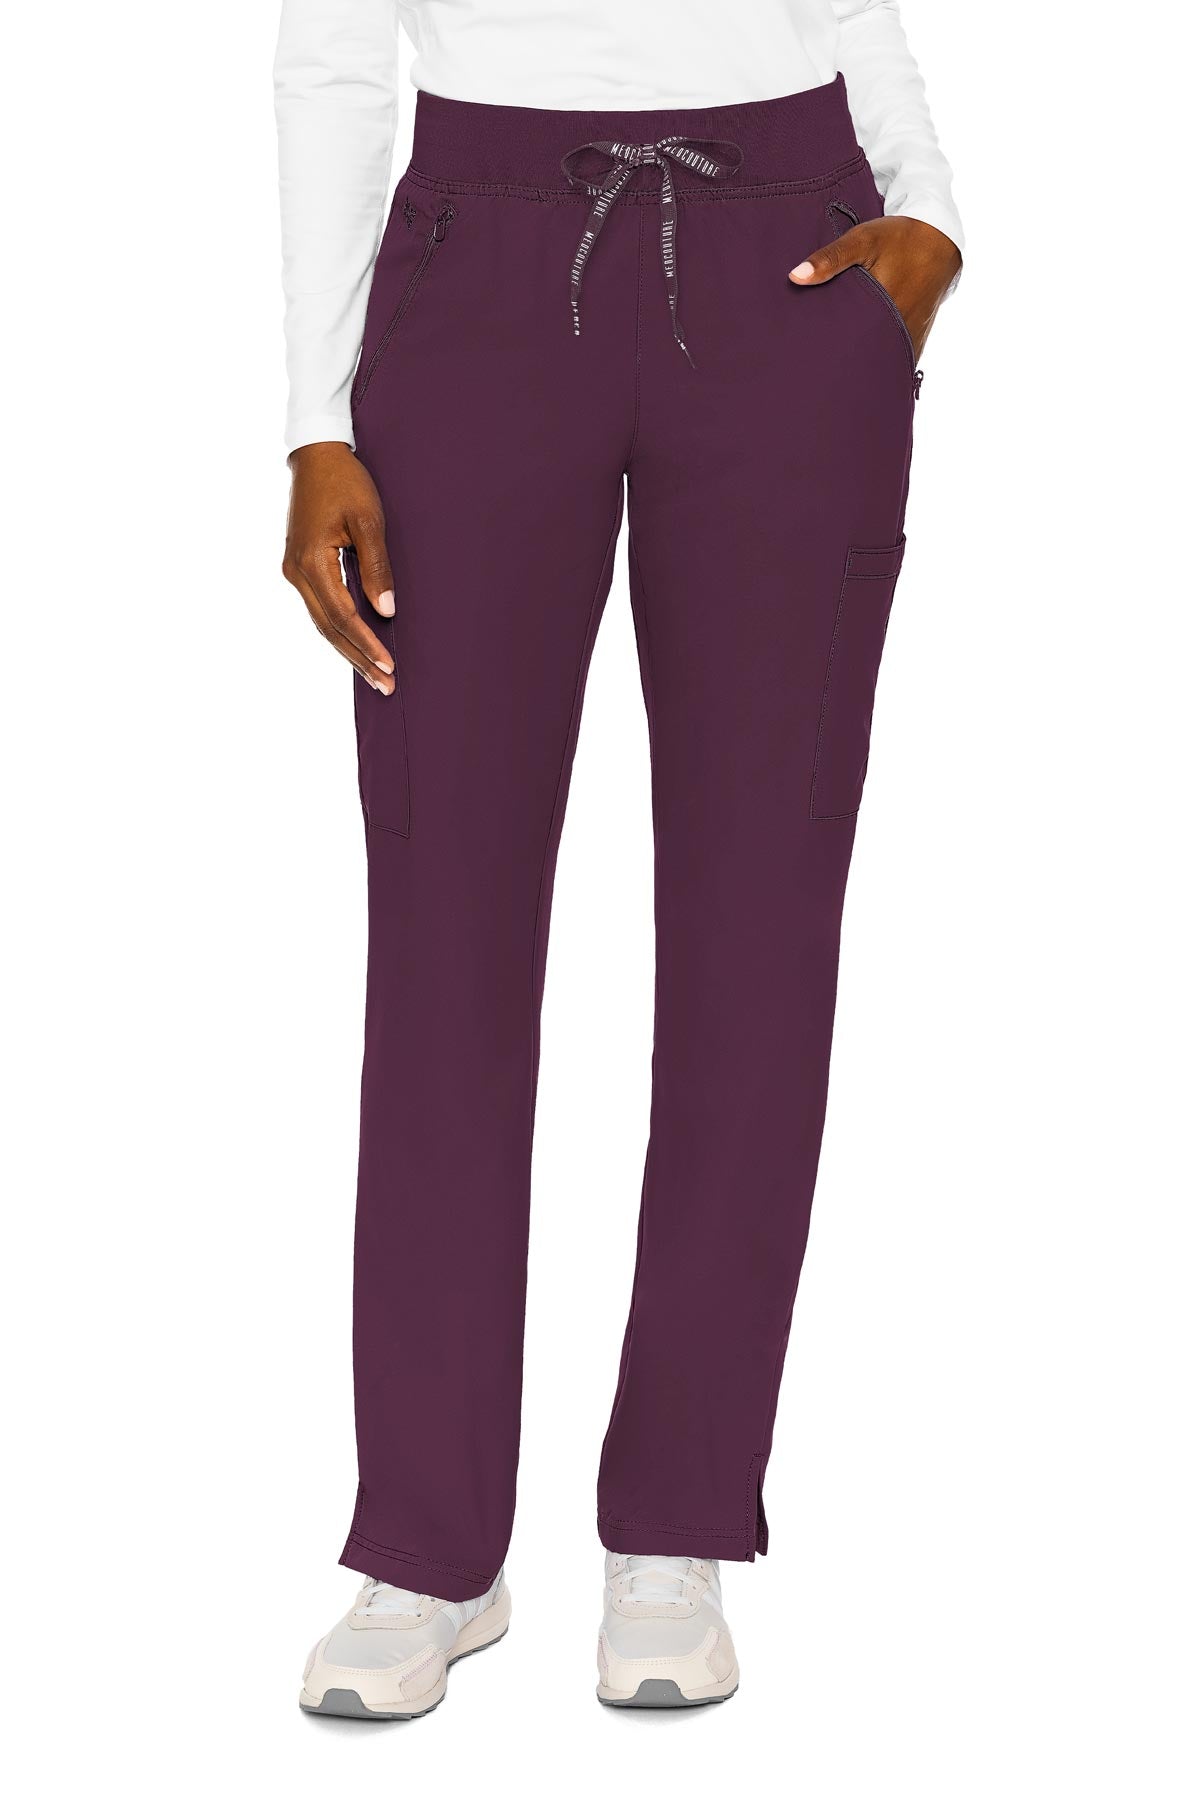 Med Couture Zipper Pant